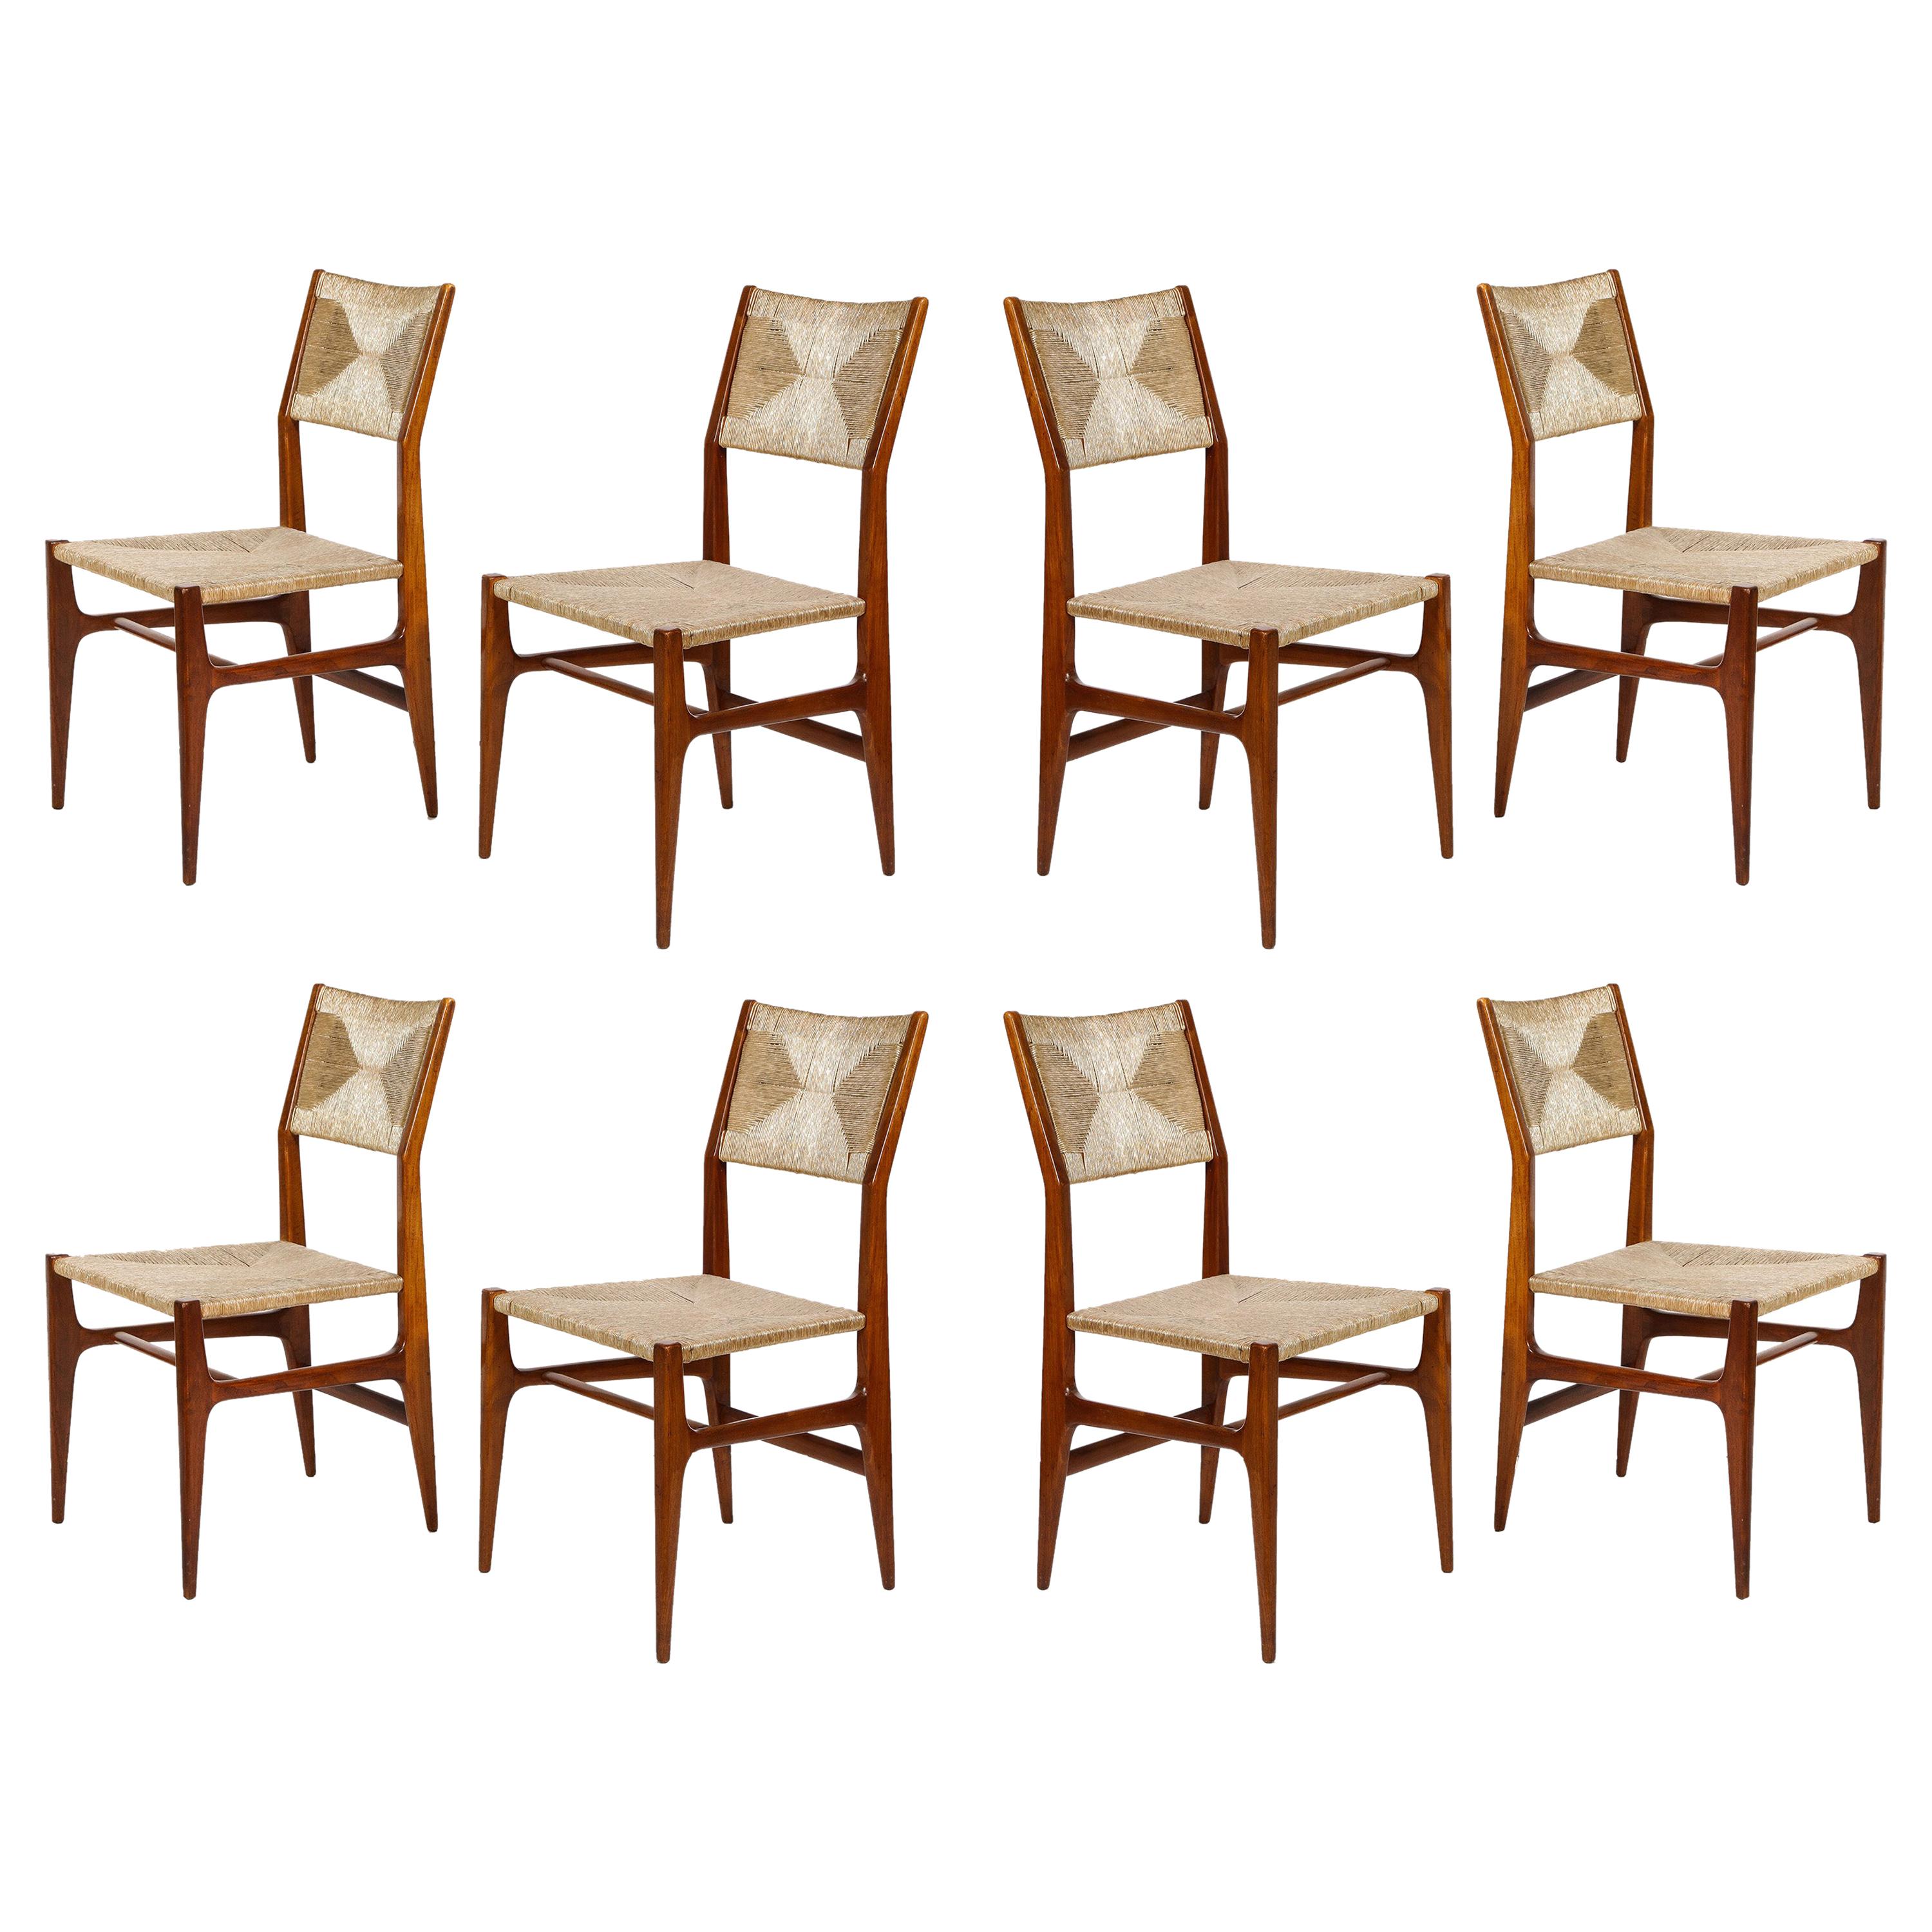 Set of 8 Side Chairs by Gio Ponti for M. Singer & Sons